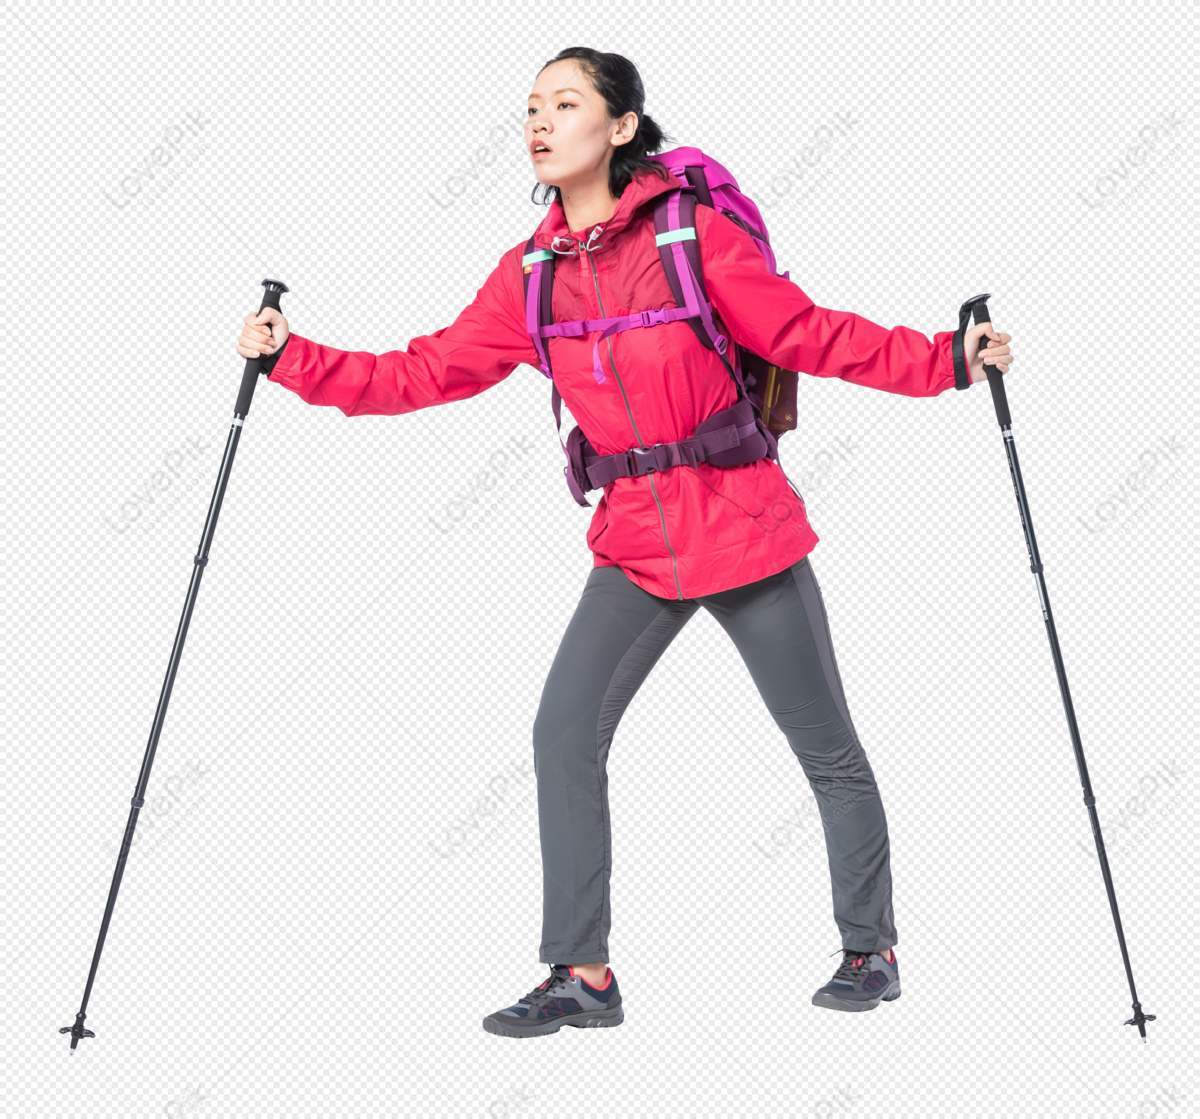 Hiking Young Women PNG Hd Transparent Image And Clipart Image For Free ...